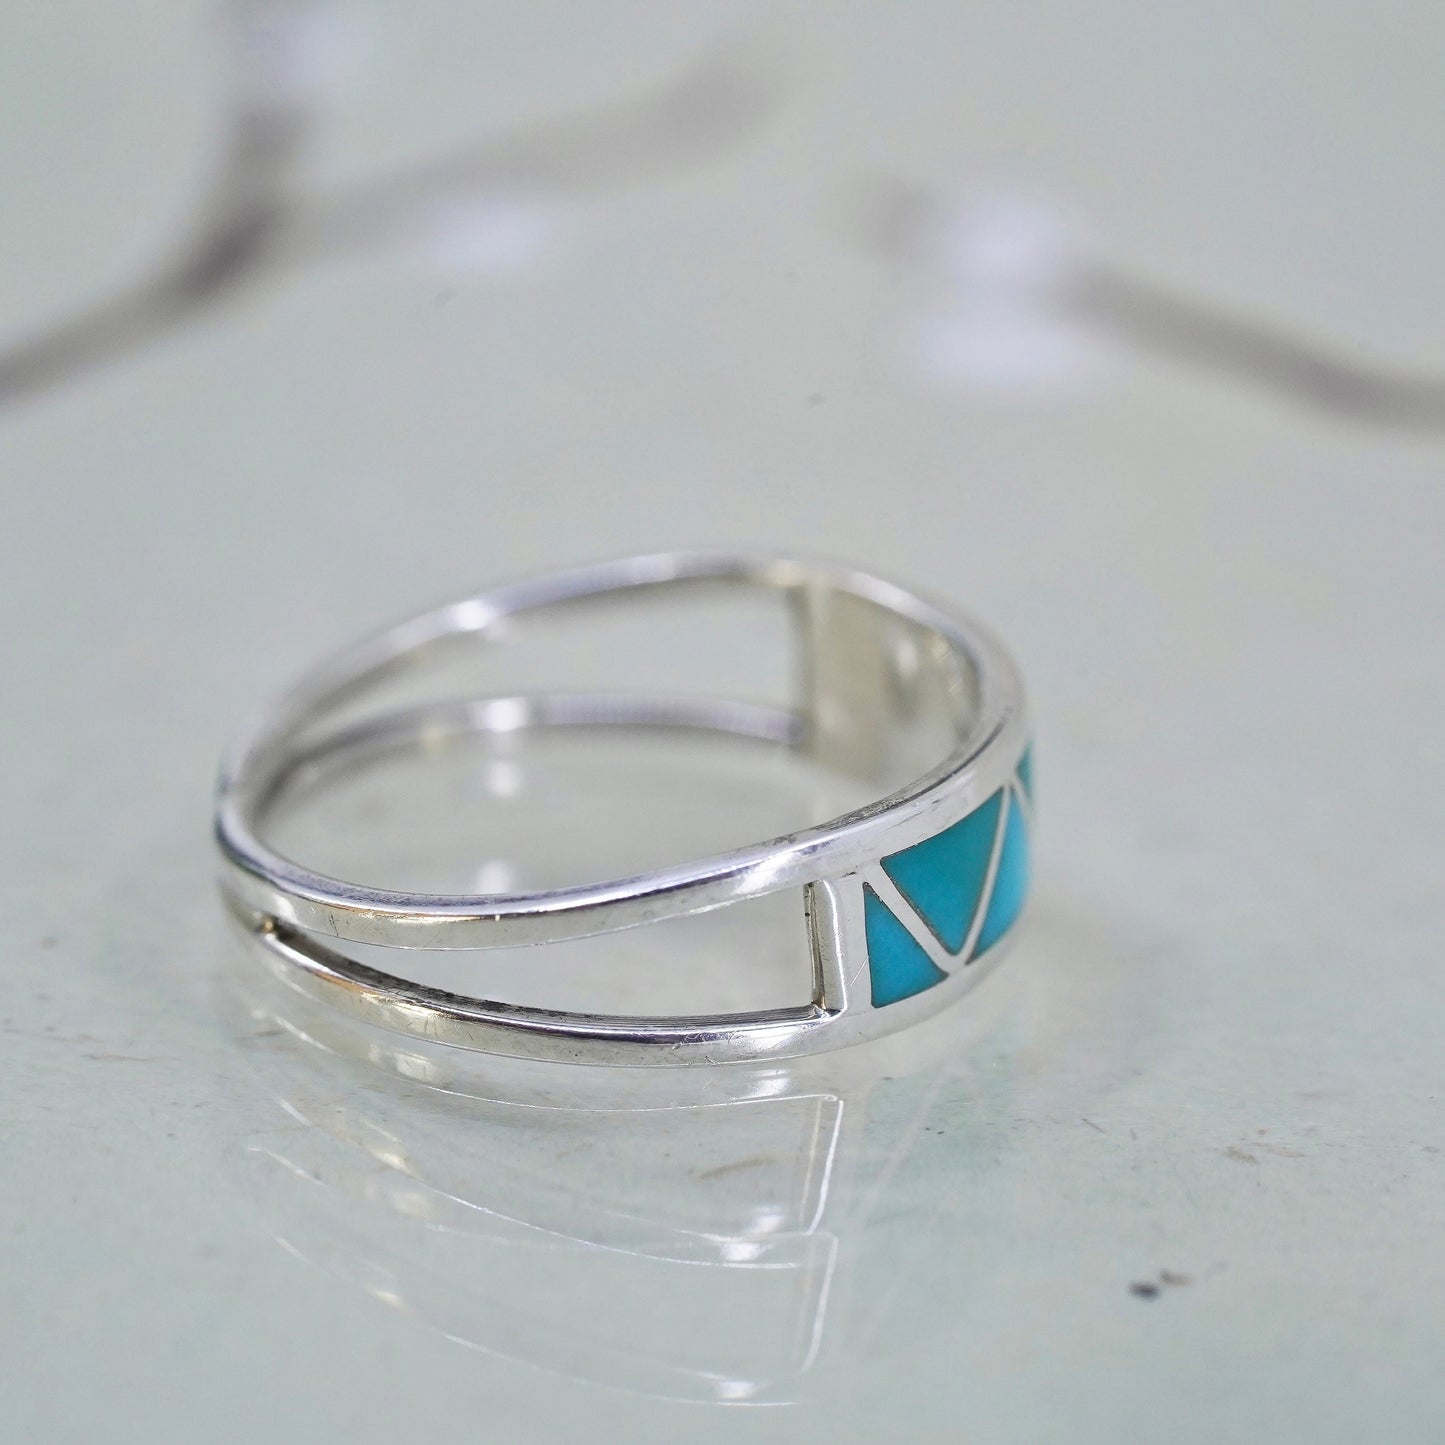 Size 6, Jason & Pearl Sterling silver ring, 925 zig zag band turquoise, Zuni